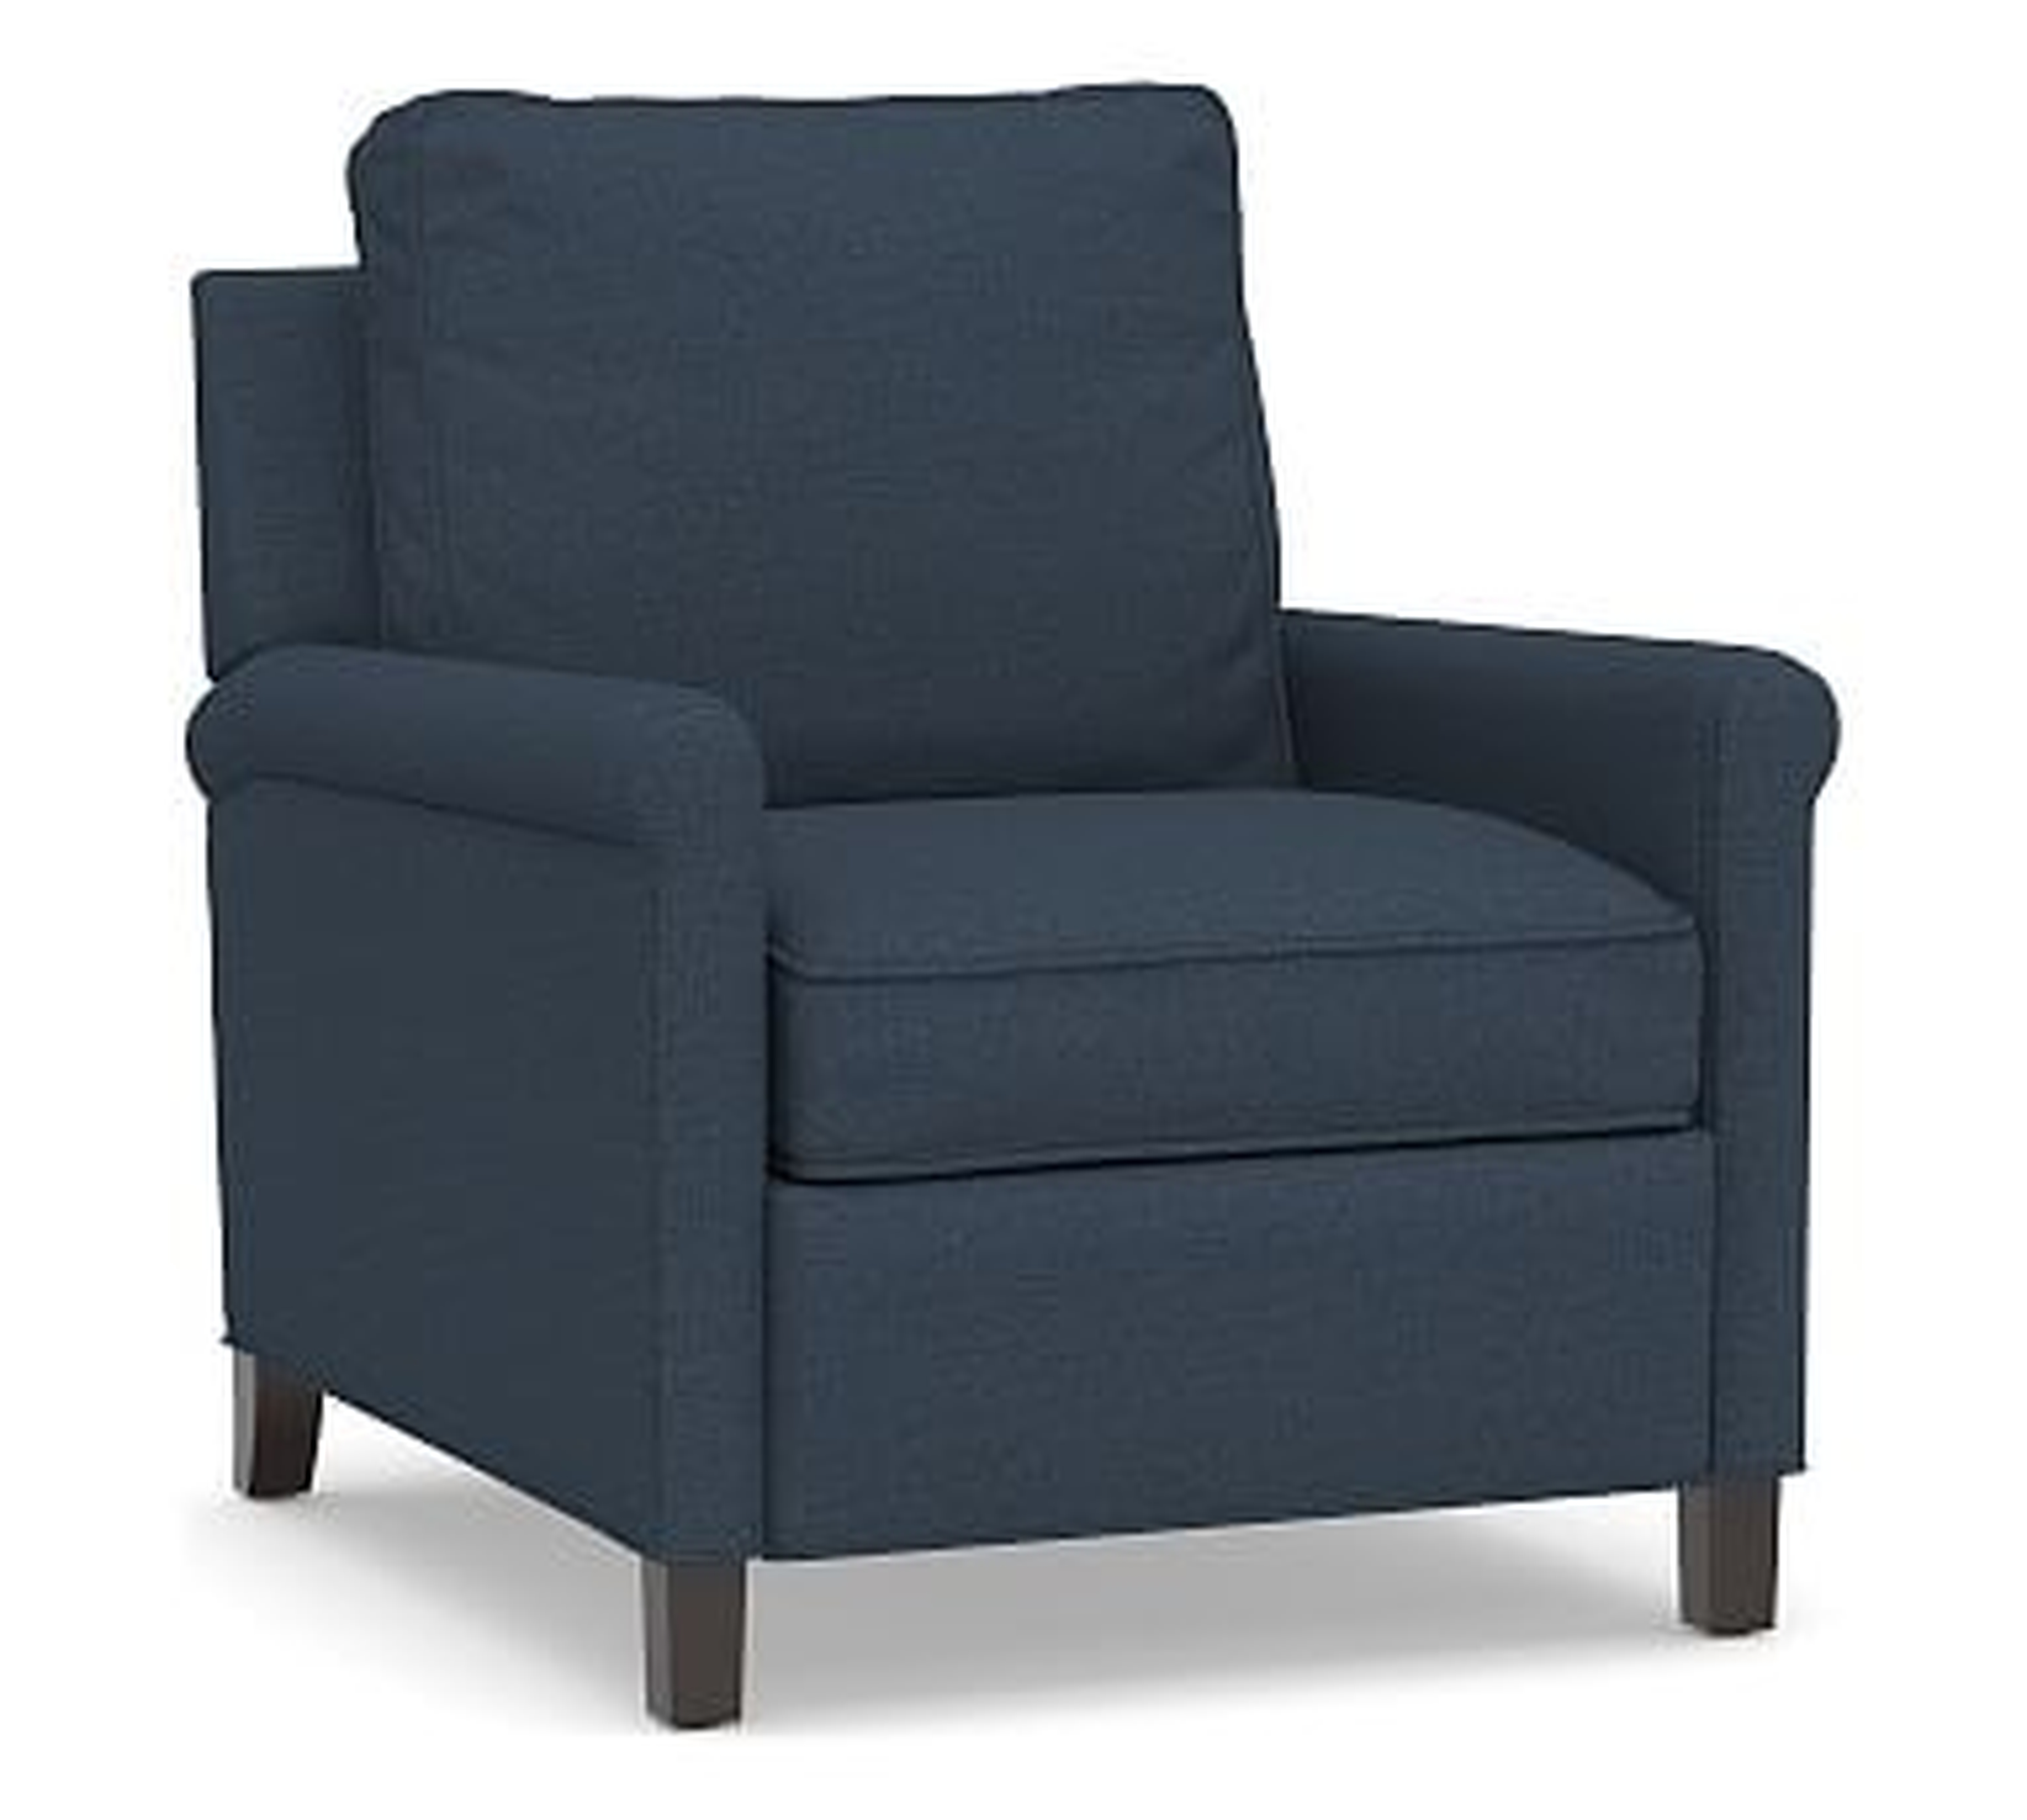 Tyler Roll Arm Upholstered Recliner without Nailheads, Polyester Wrapped Cushions, Brushed Crossweave Navy - Pottery Barn